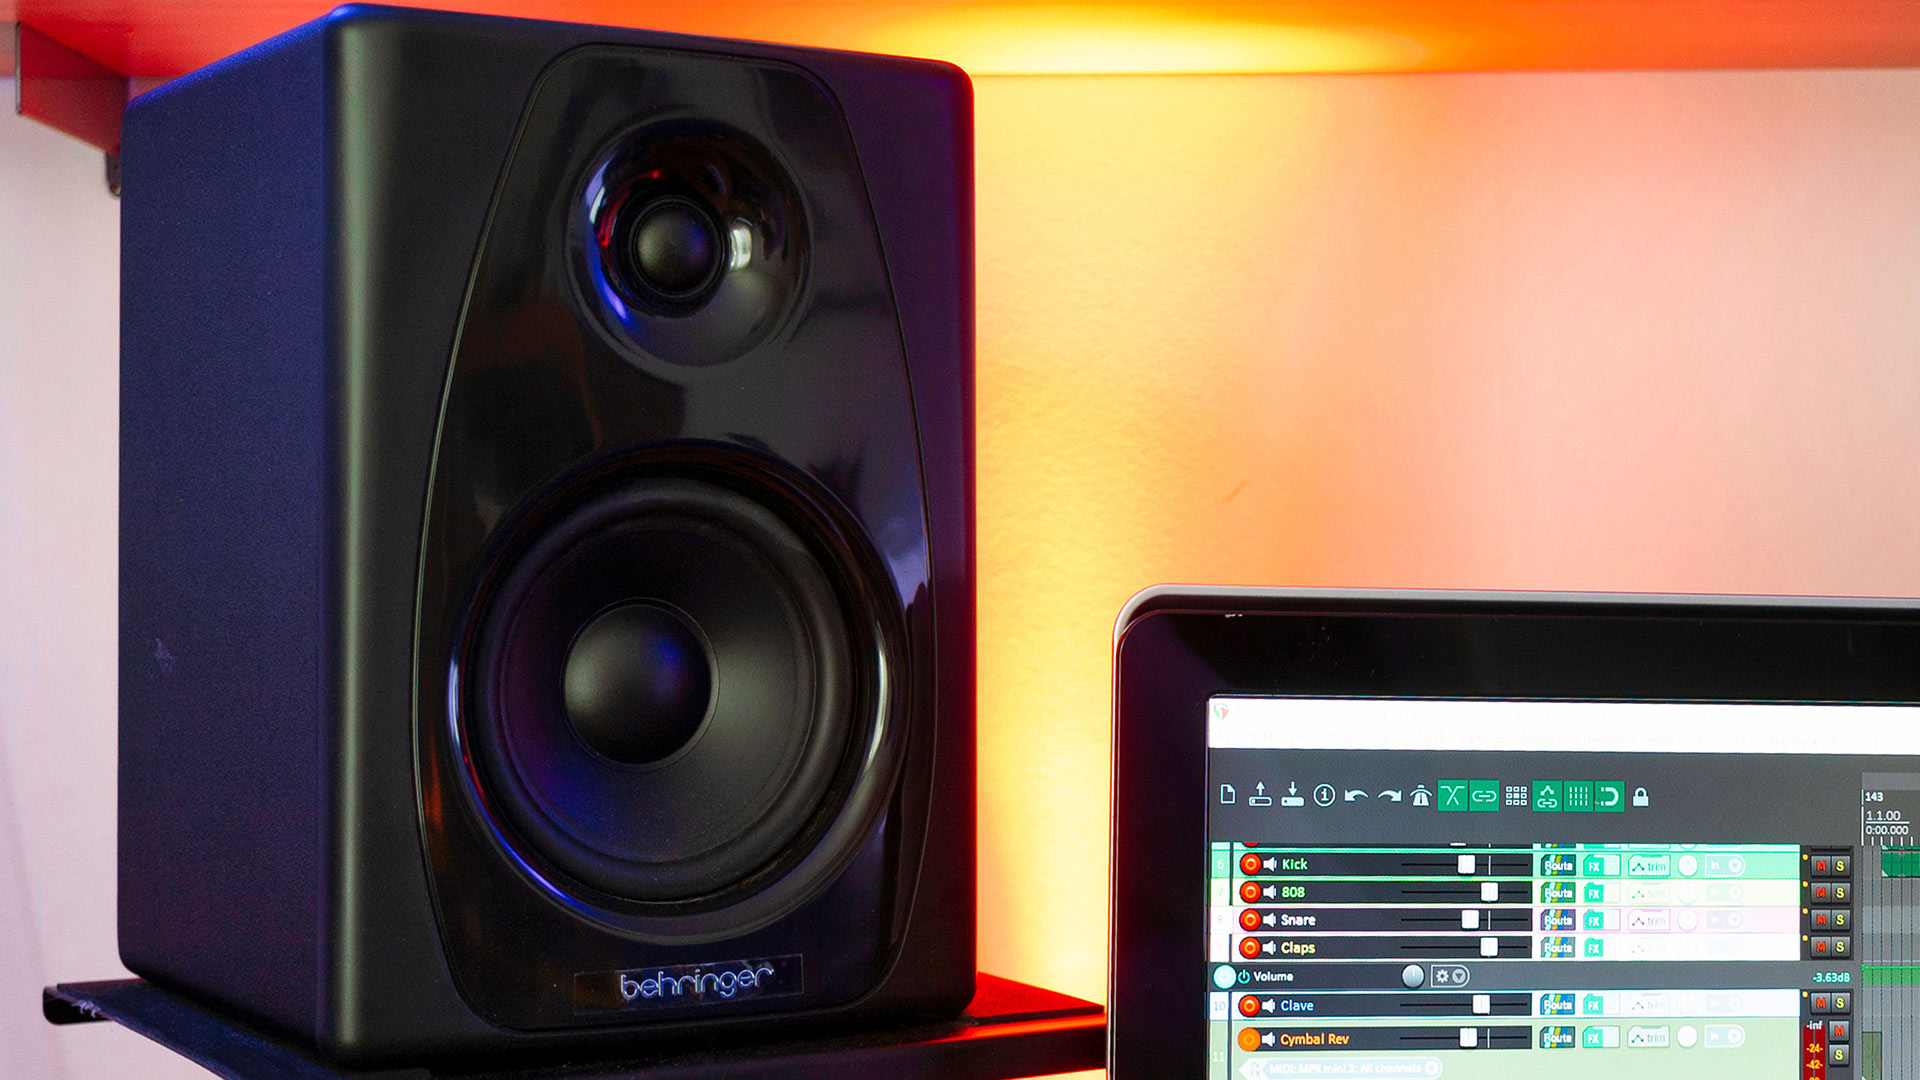 A photo of one Behringer Studio 50 USB speaker placed next to a computer screen.